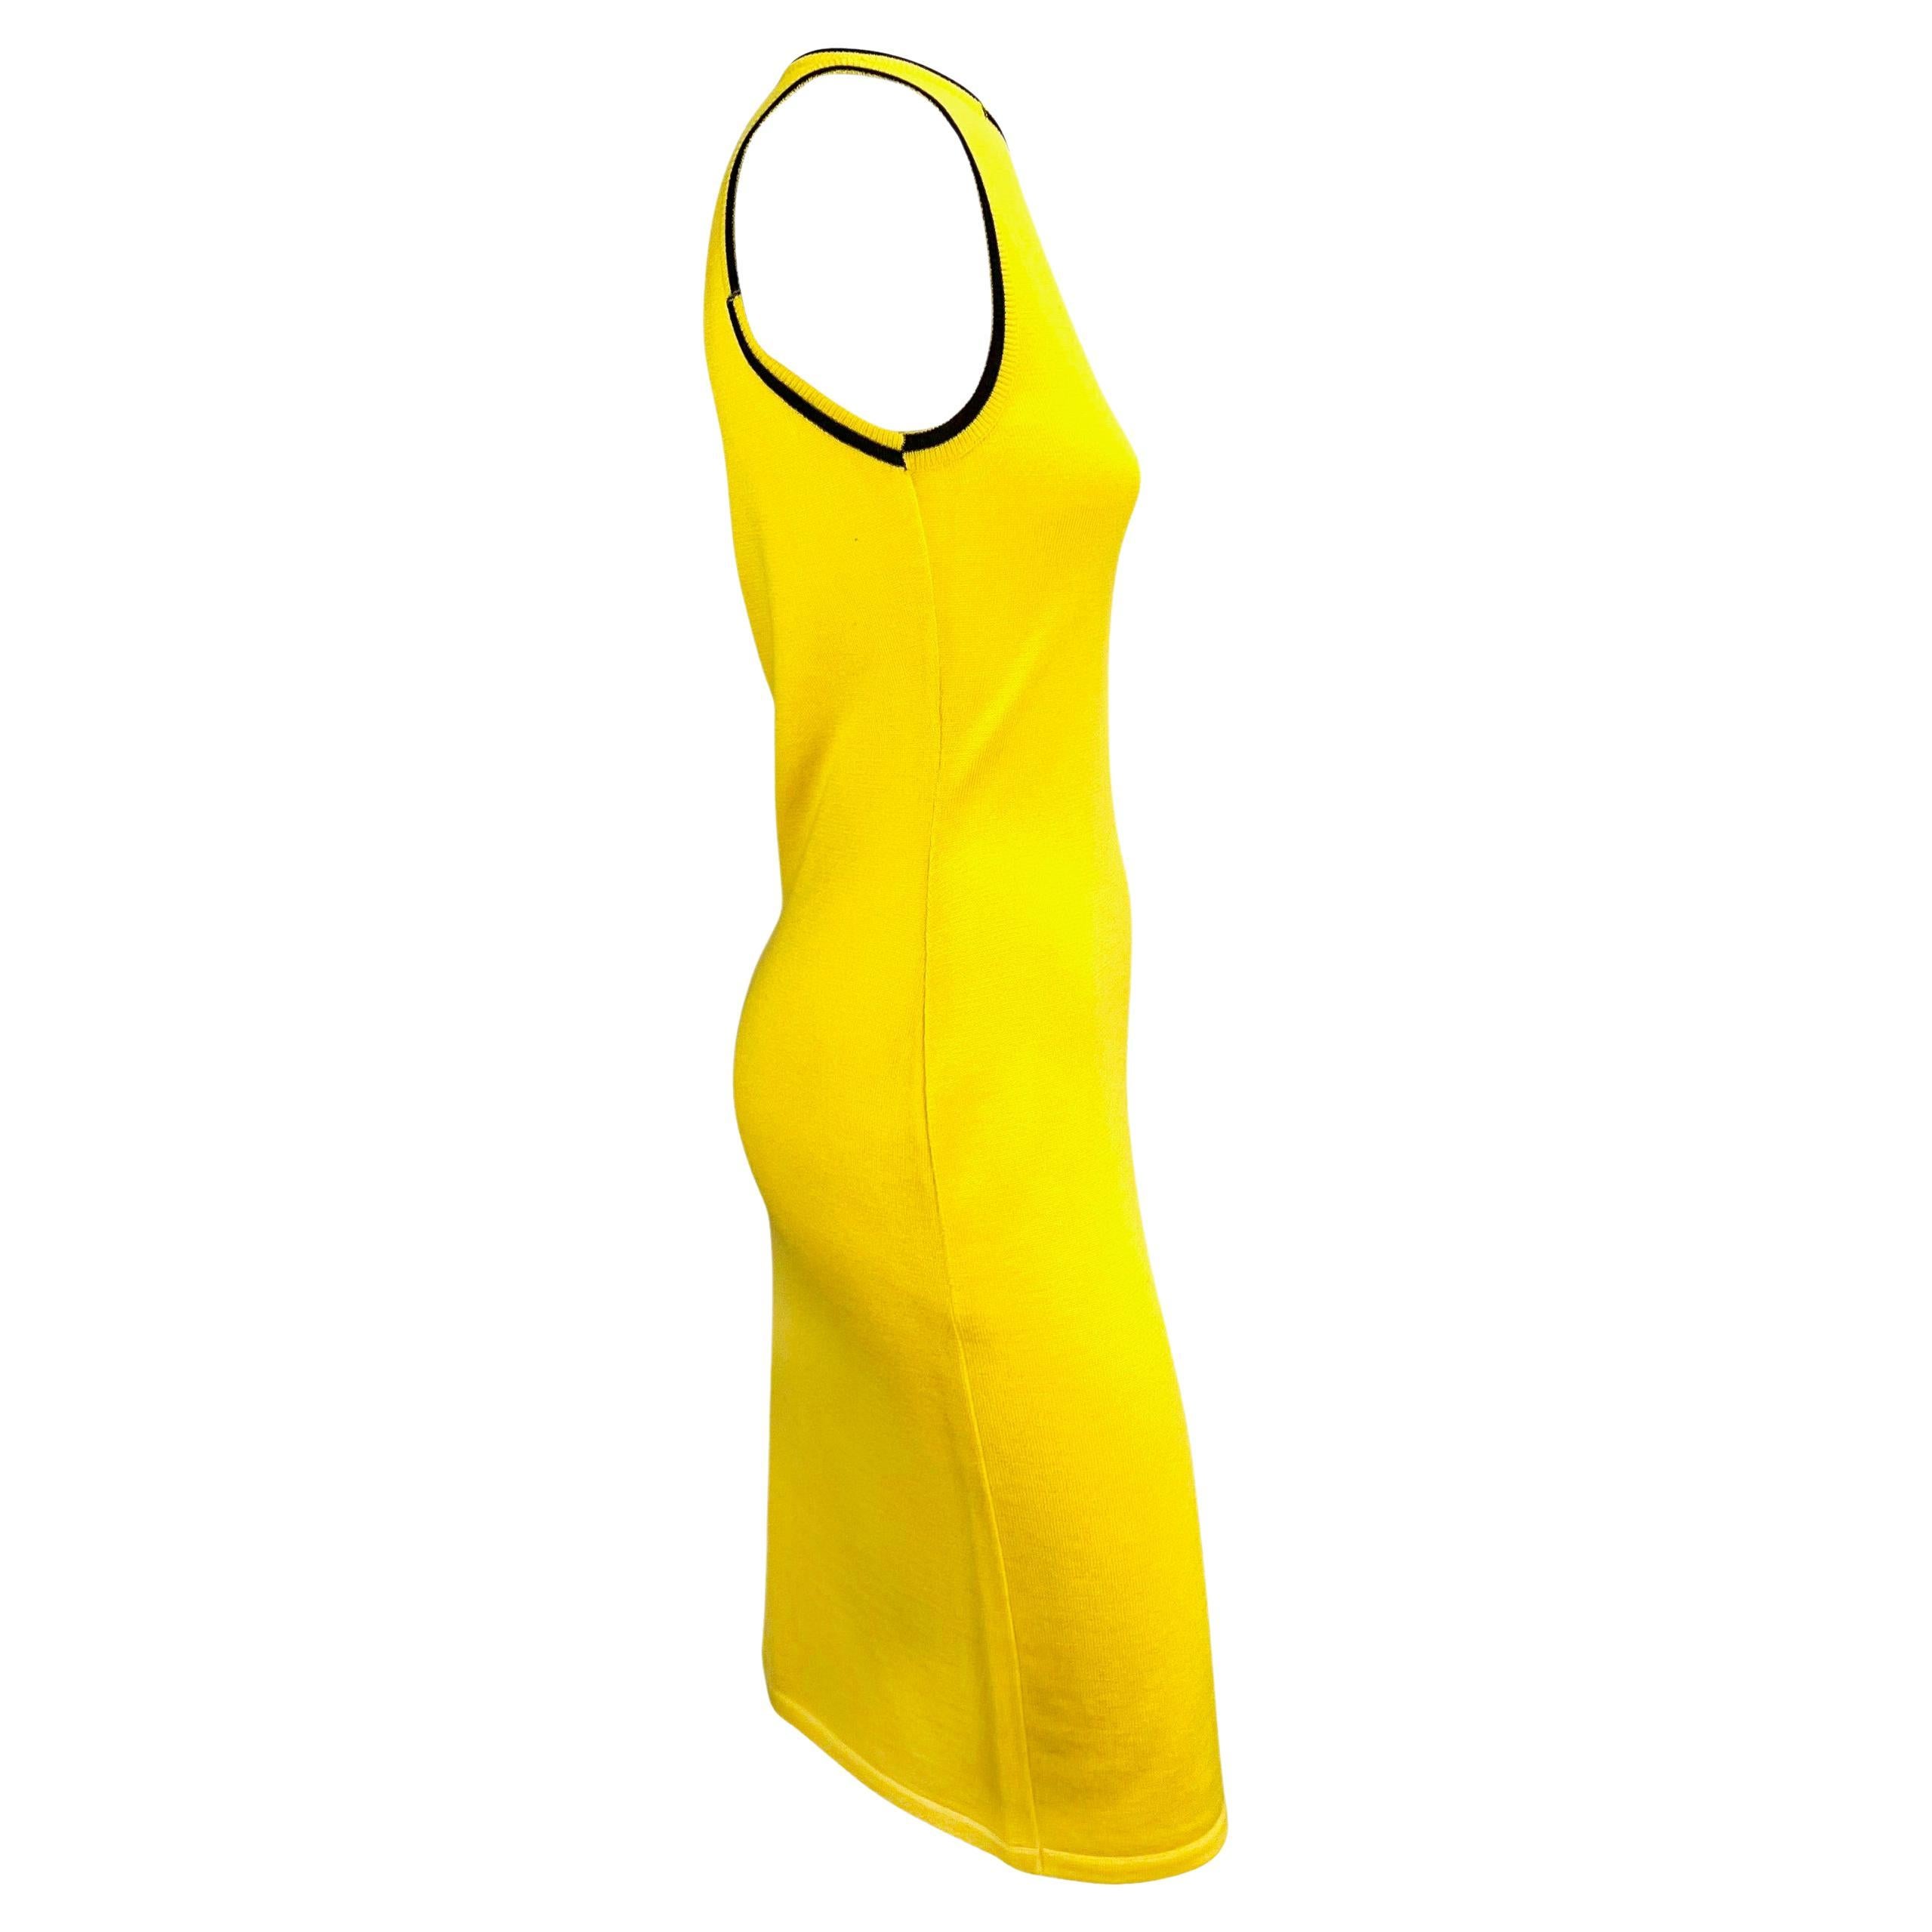 Late 1990s Gianni Versace Canary Yellow Knit Wool Sleeveless Dress In Excellent Condition For Sale In West Hollywood, CA